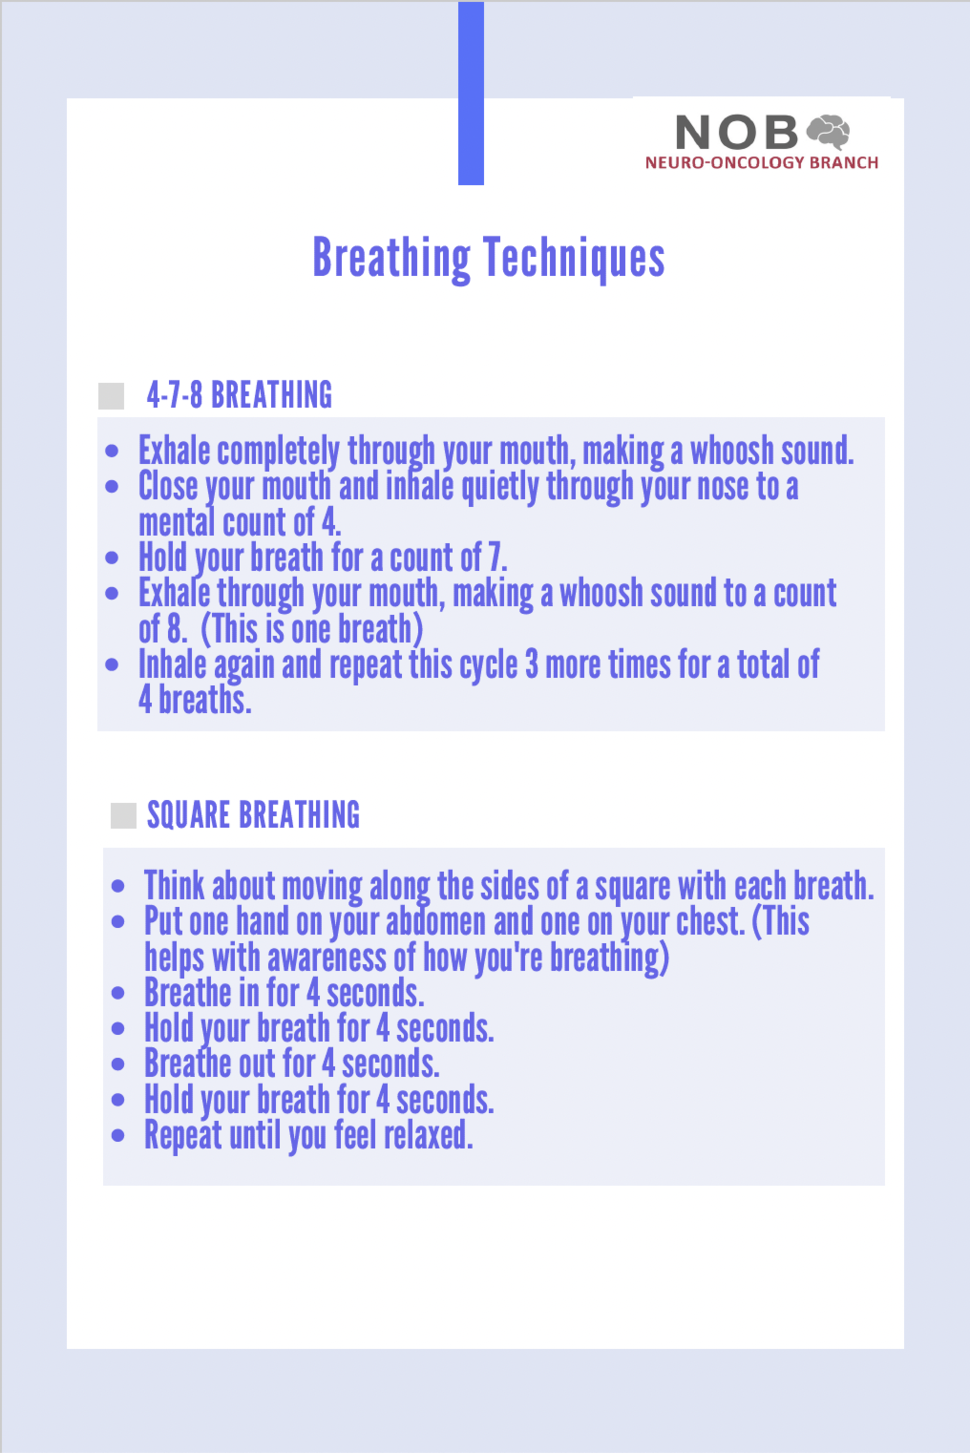 A card with instructions for "4-7-8 Breathing" and "Square Breathing."